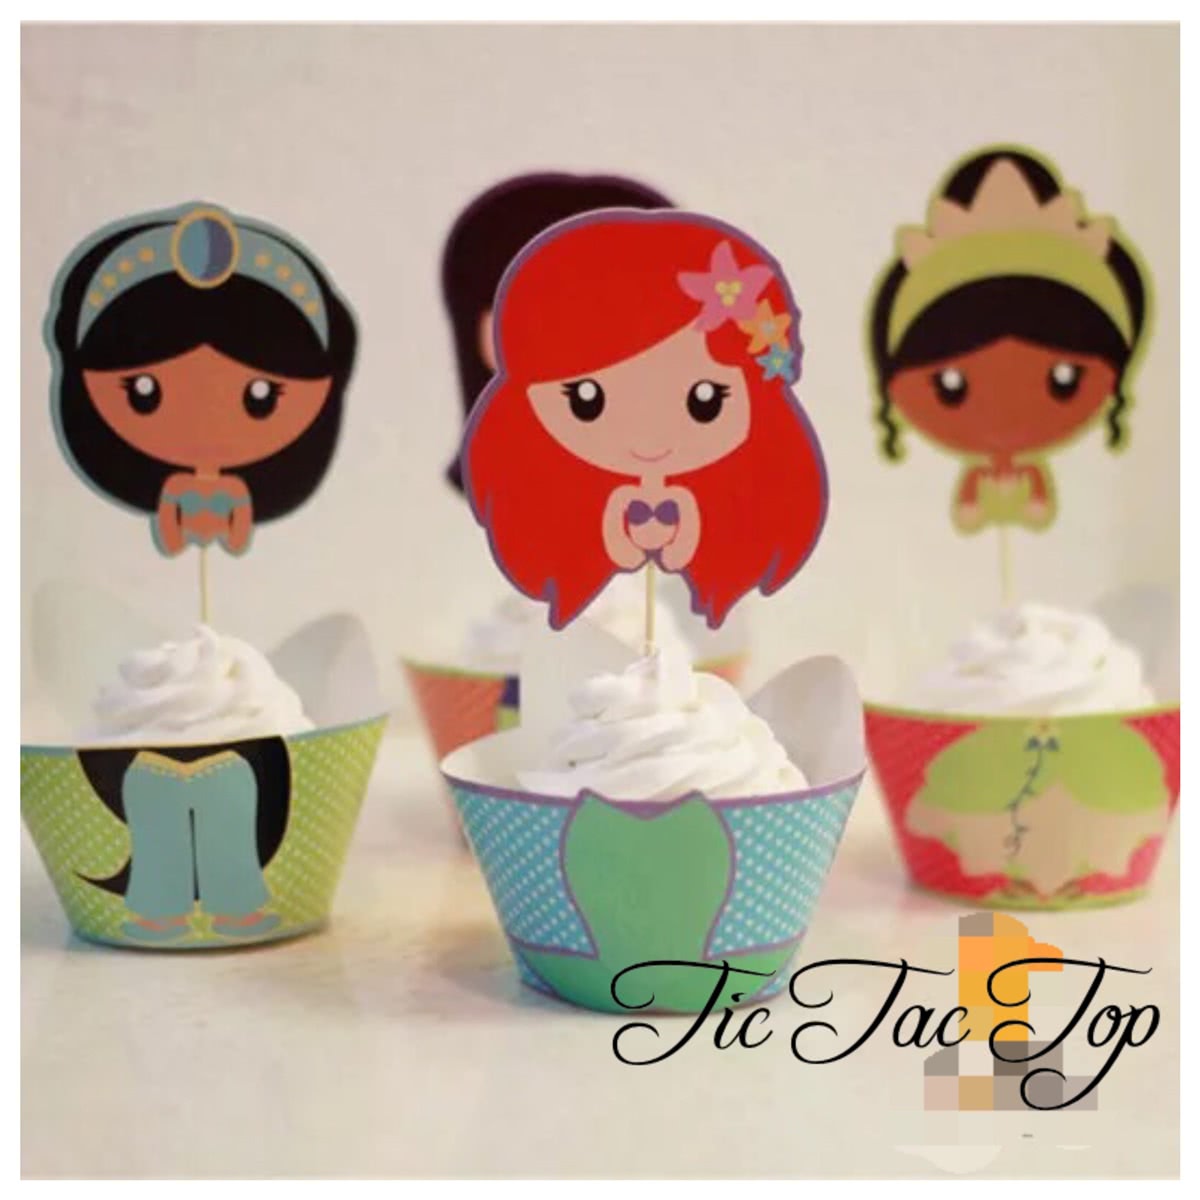 Disney Princesses SPECIAL EDITION Cupcake Wrappers & Toppers - Tic Tac Top